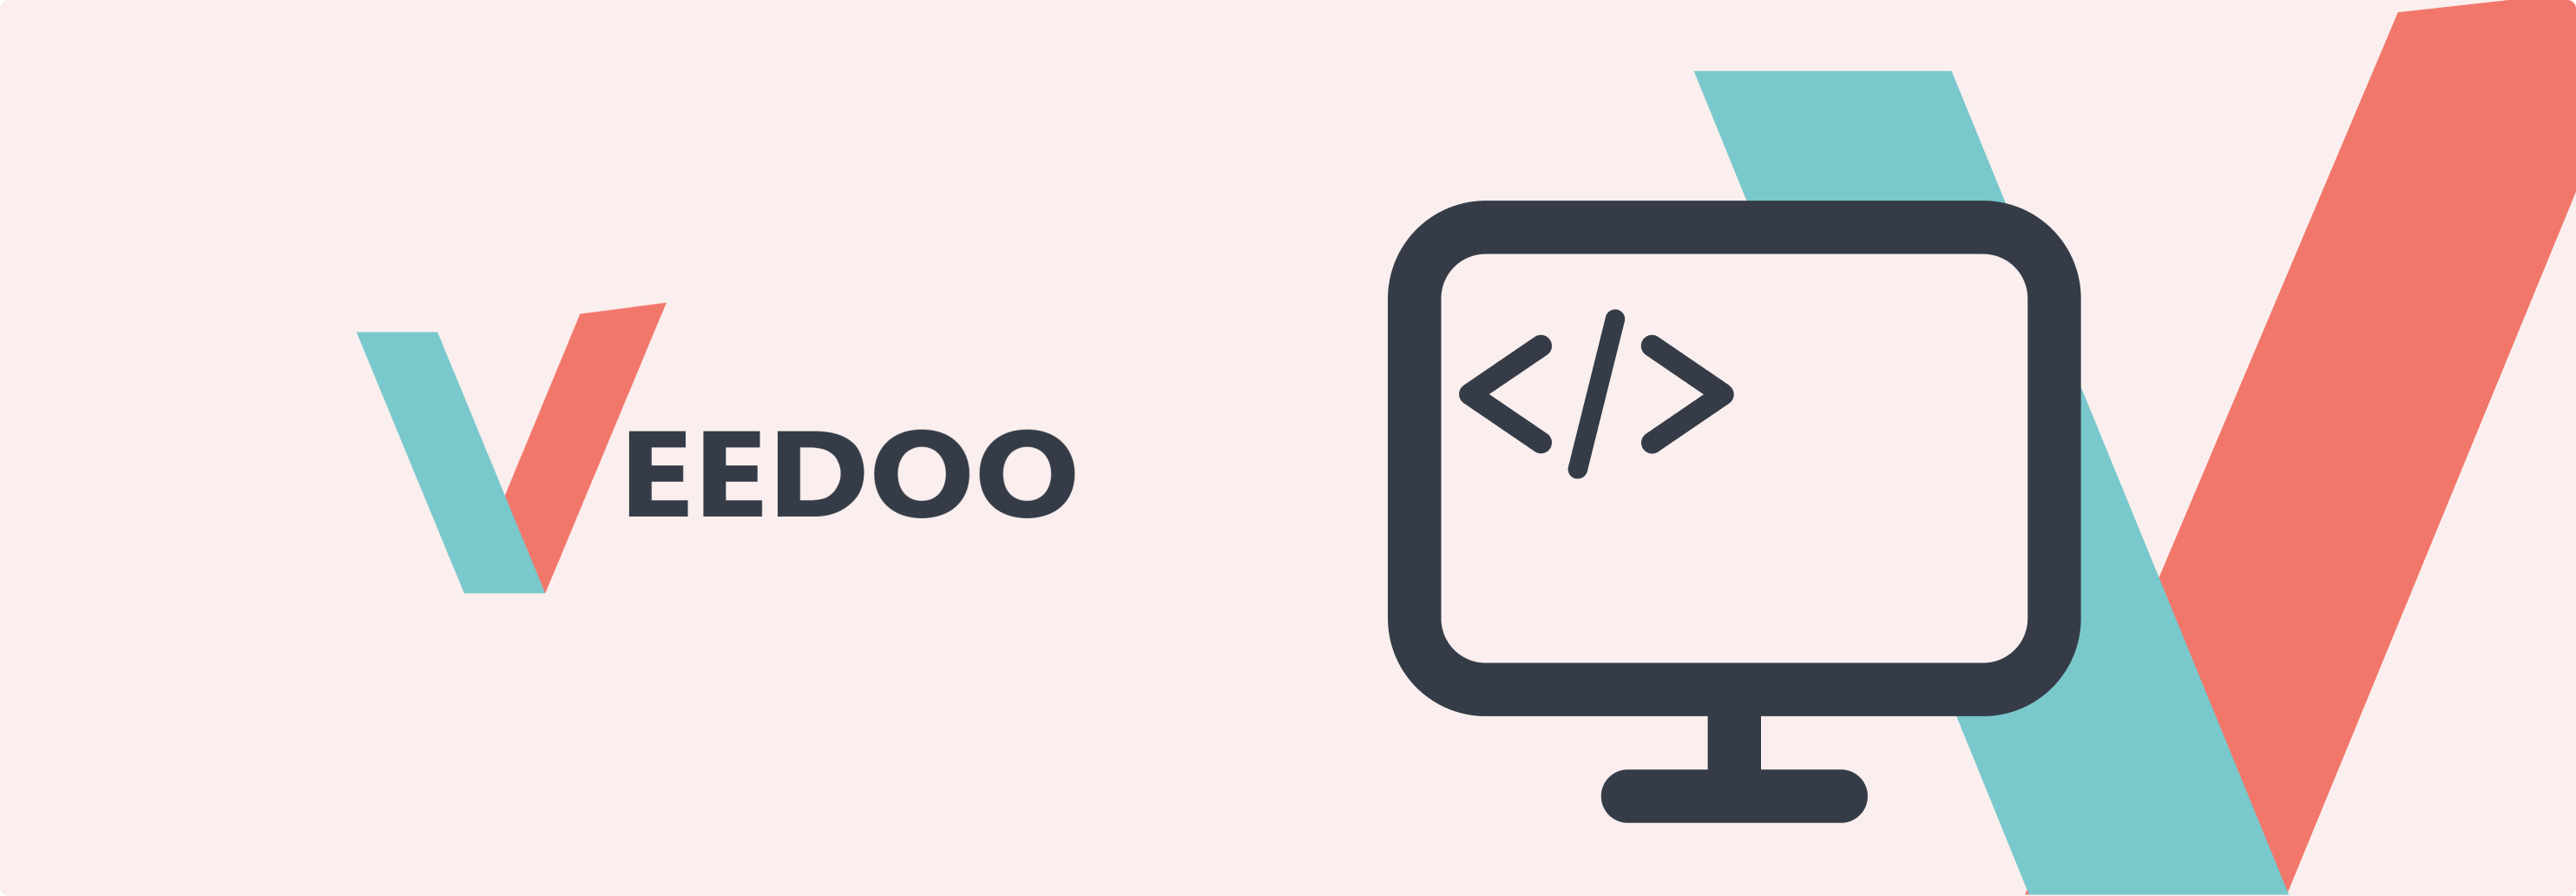 In the picture - the image consists of two parts, on the left is the text "VEEDOO", on the right - On the front part, a monitor of the coding developer is schematically depicted, on the back - the logo of the VEEDOO company